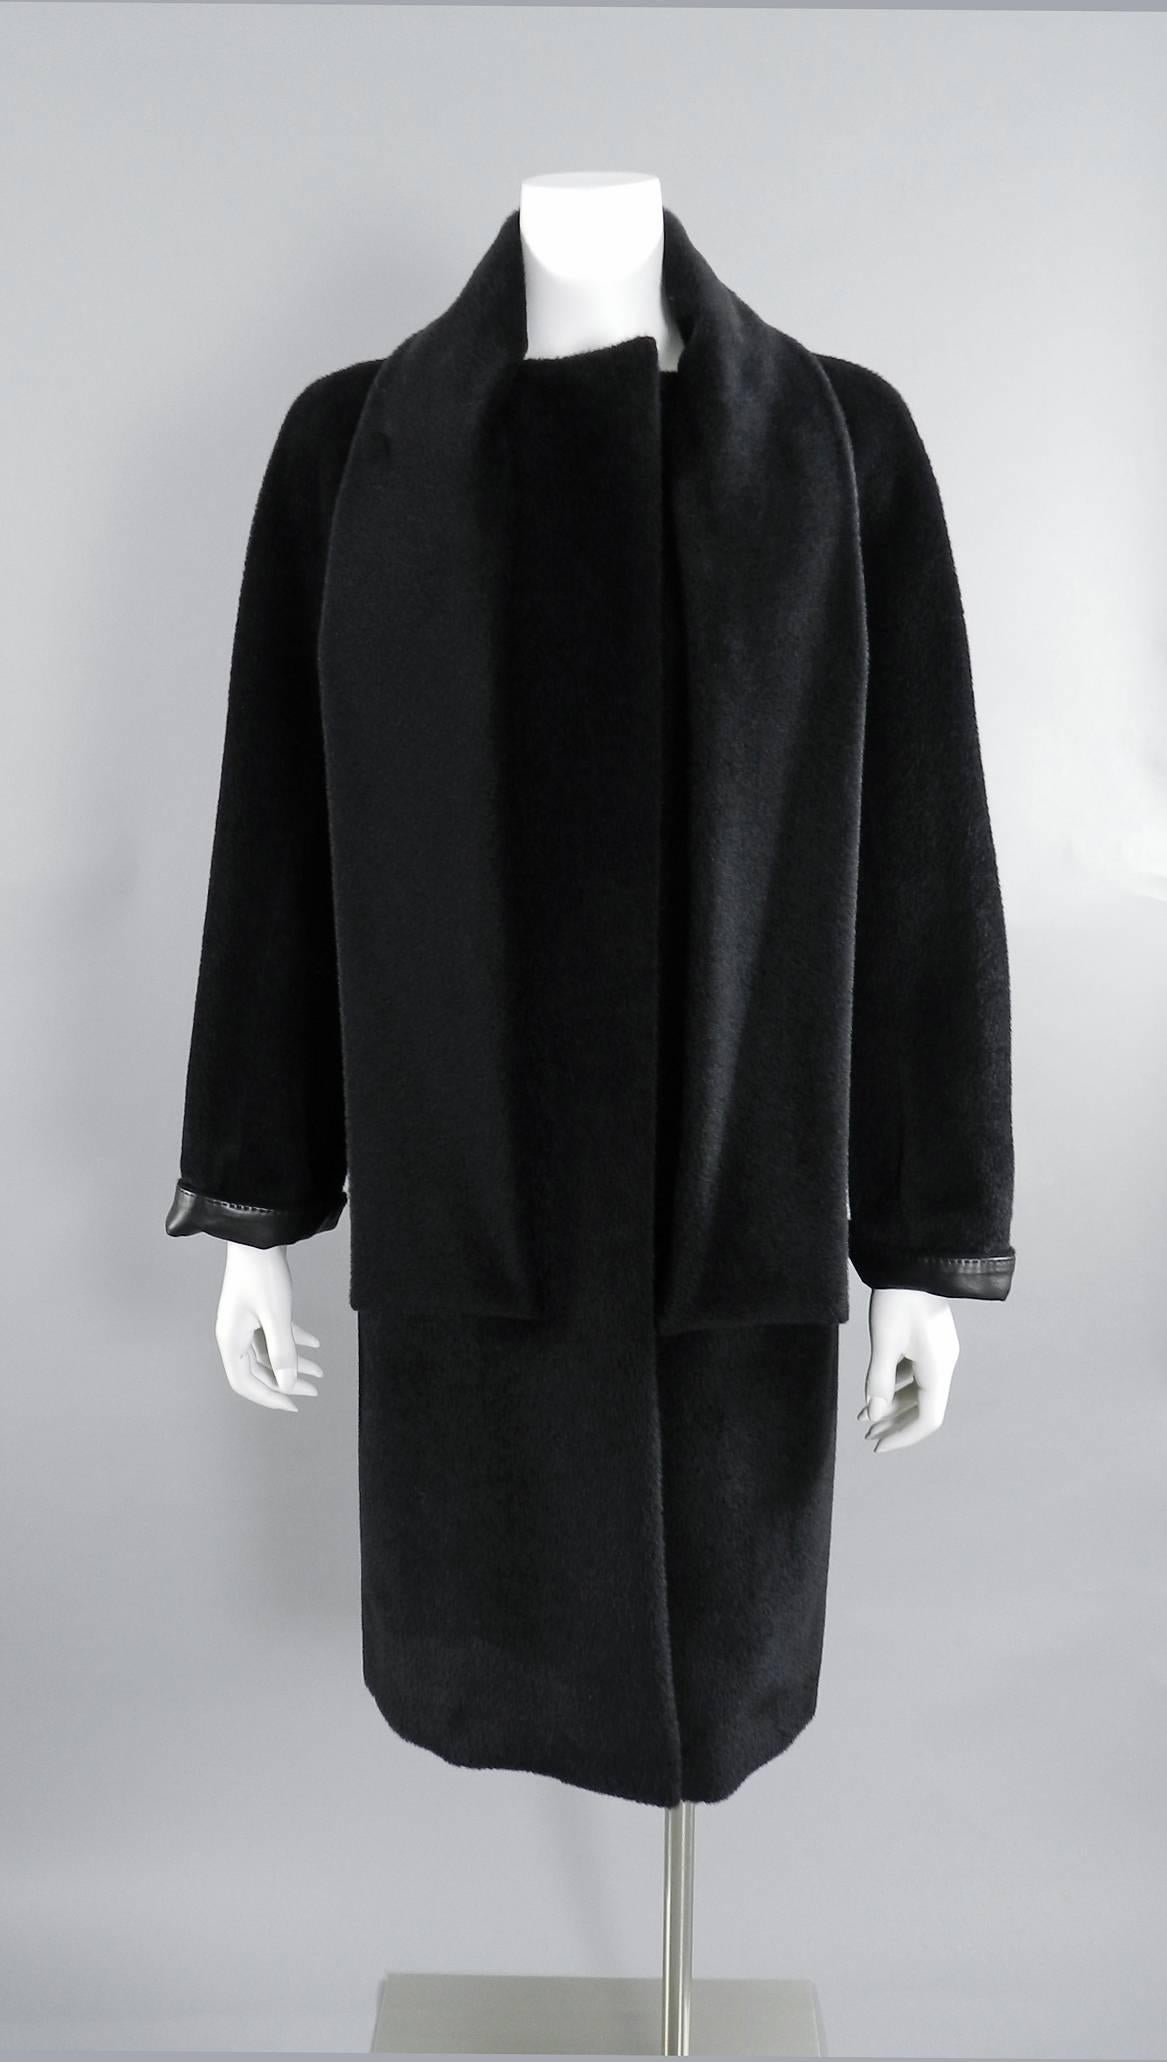 Hermes black alpaca and leather trim coat. Textured alpaca wool with leather facing on interior front, pockets, and cuffs.  Attached sashes at neck, straight loose-cut design, hidden side hip pockets.  Tagged size FR 38 (USA 6) but can also fit an